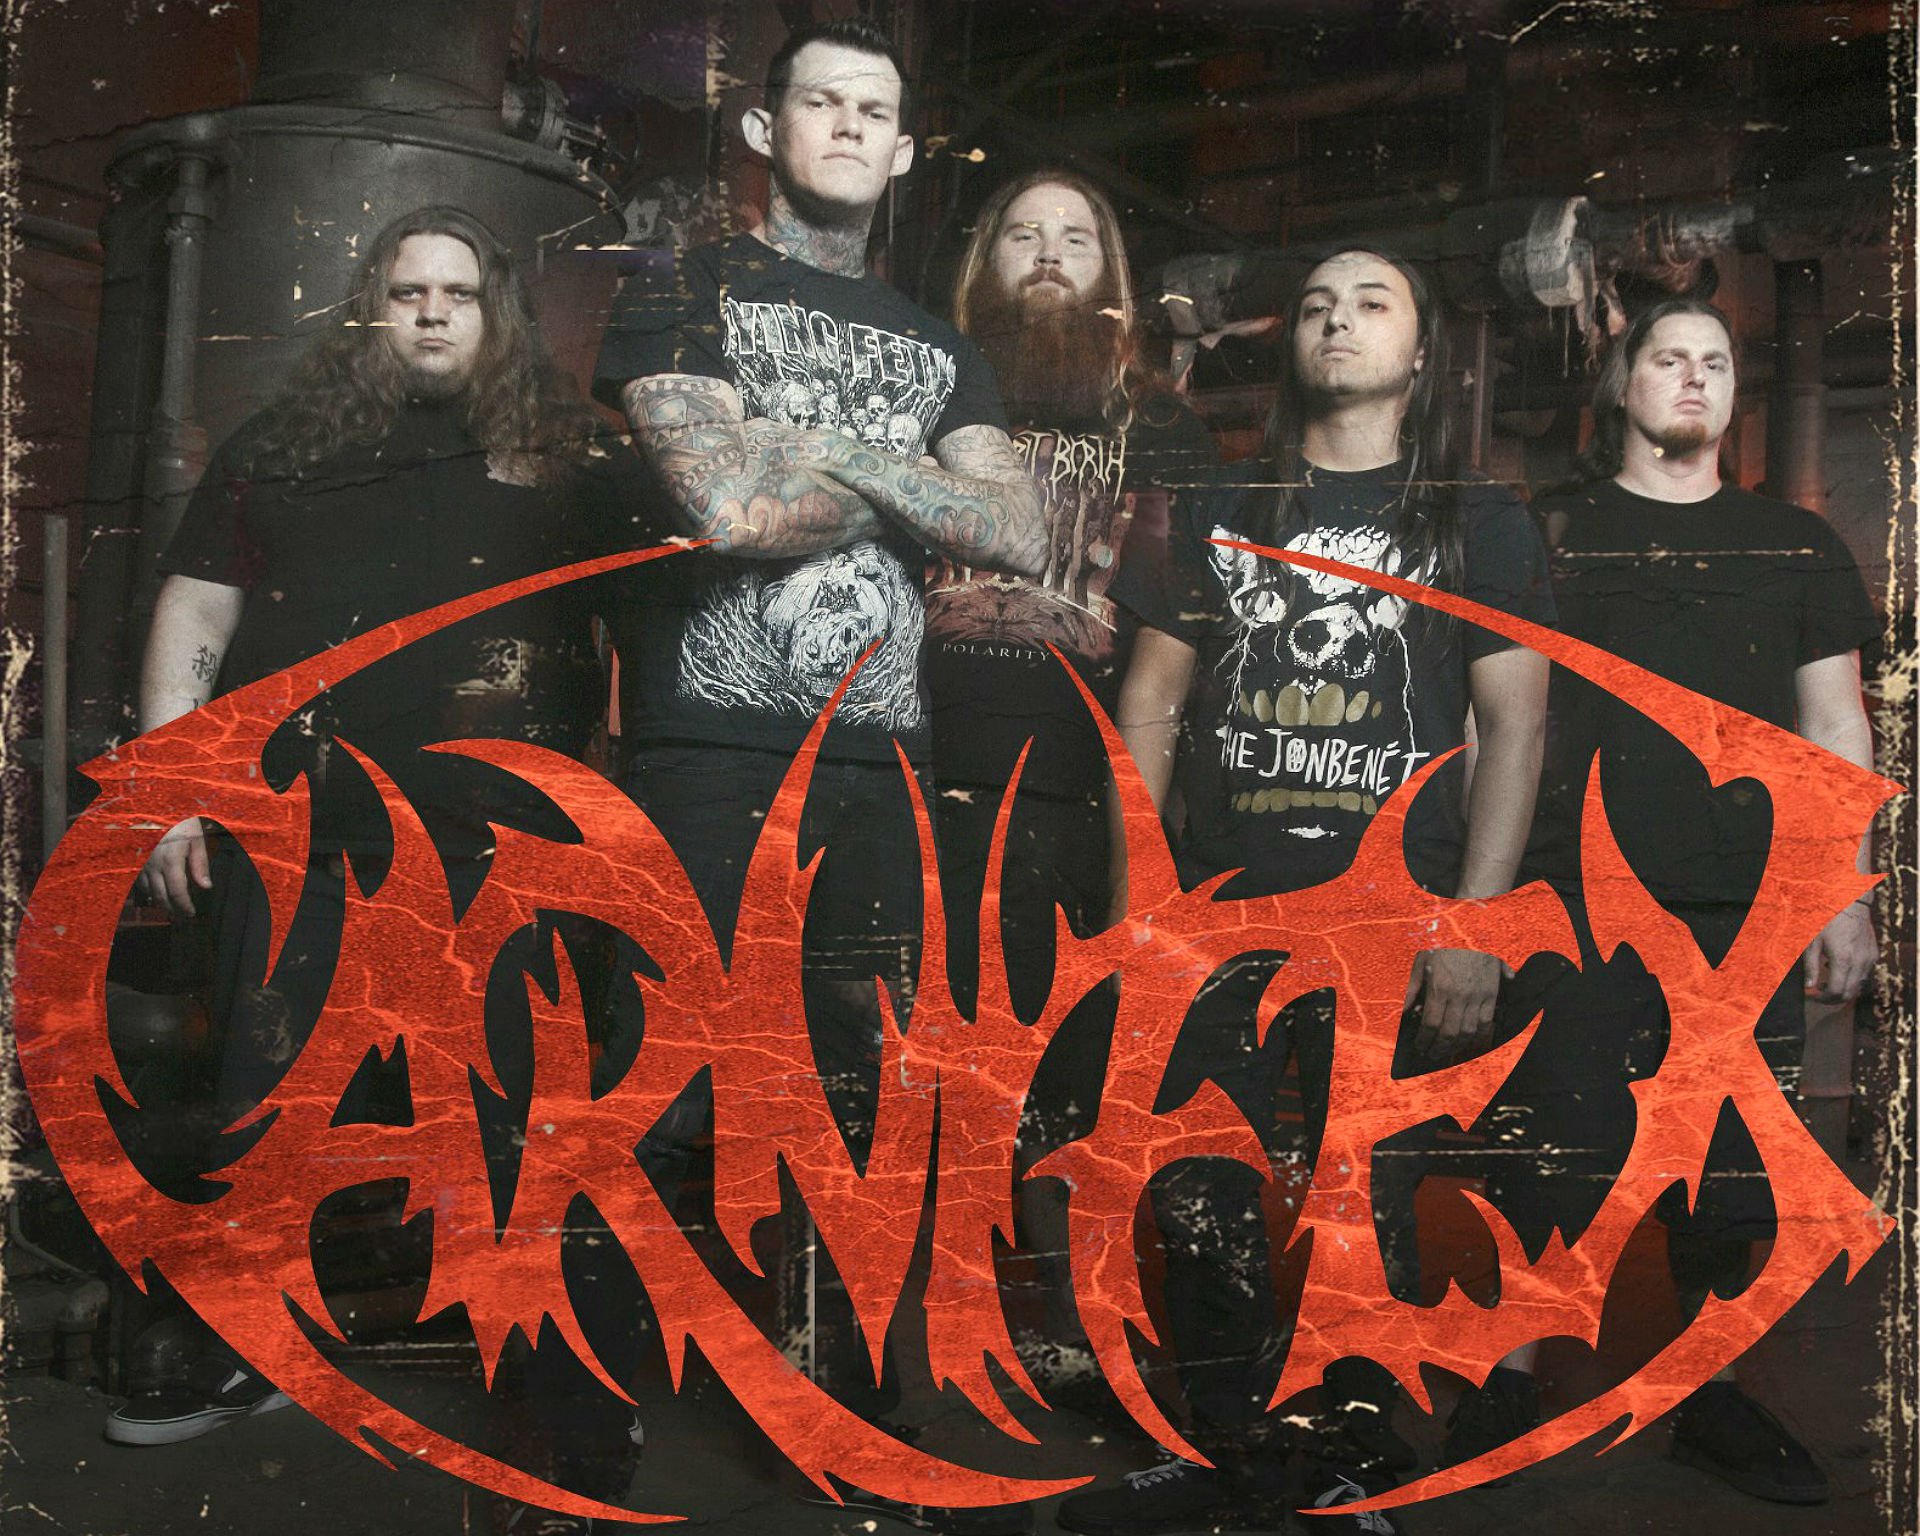 carnifex, Deathcore, Heavy, Metal, 1carn, Death, Symphonic, Poster Wallpaper